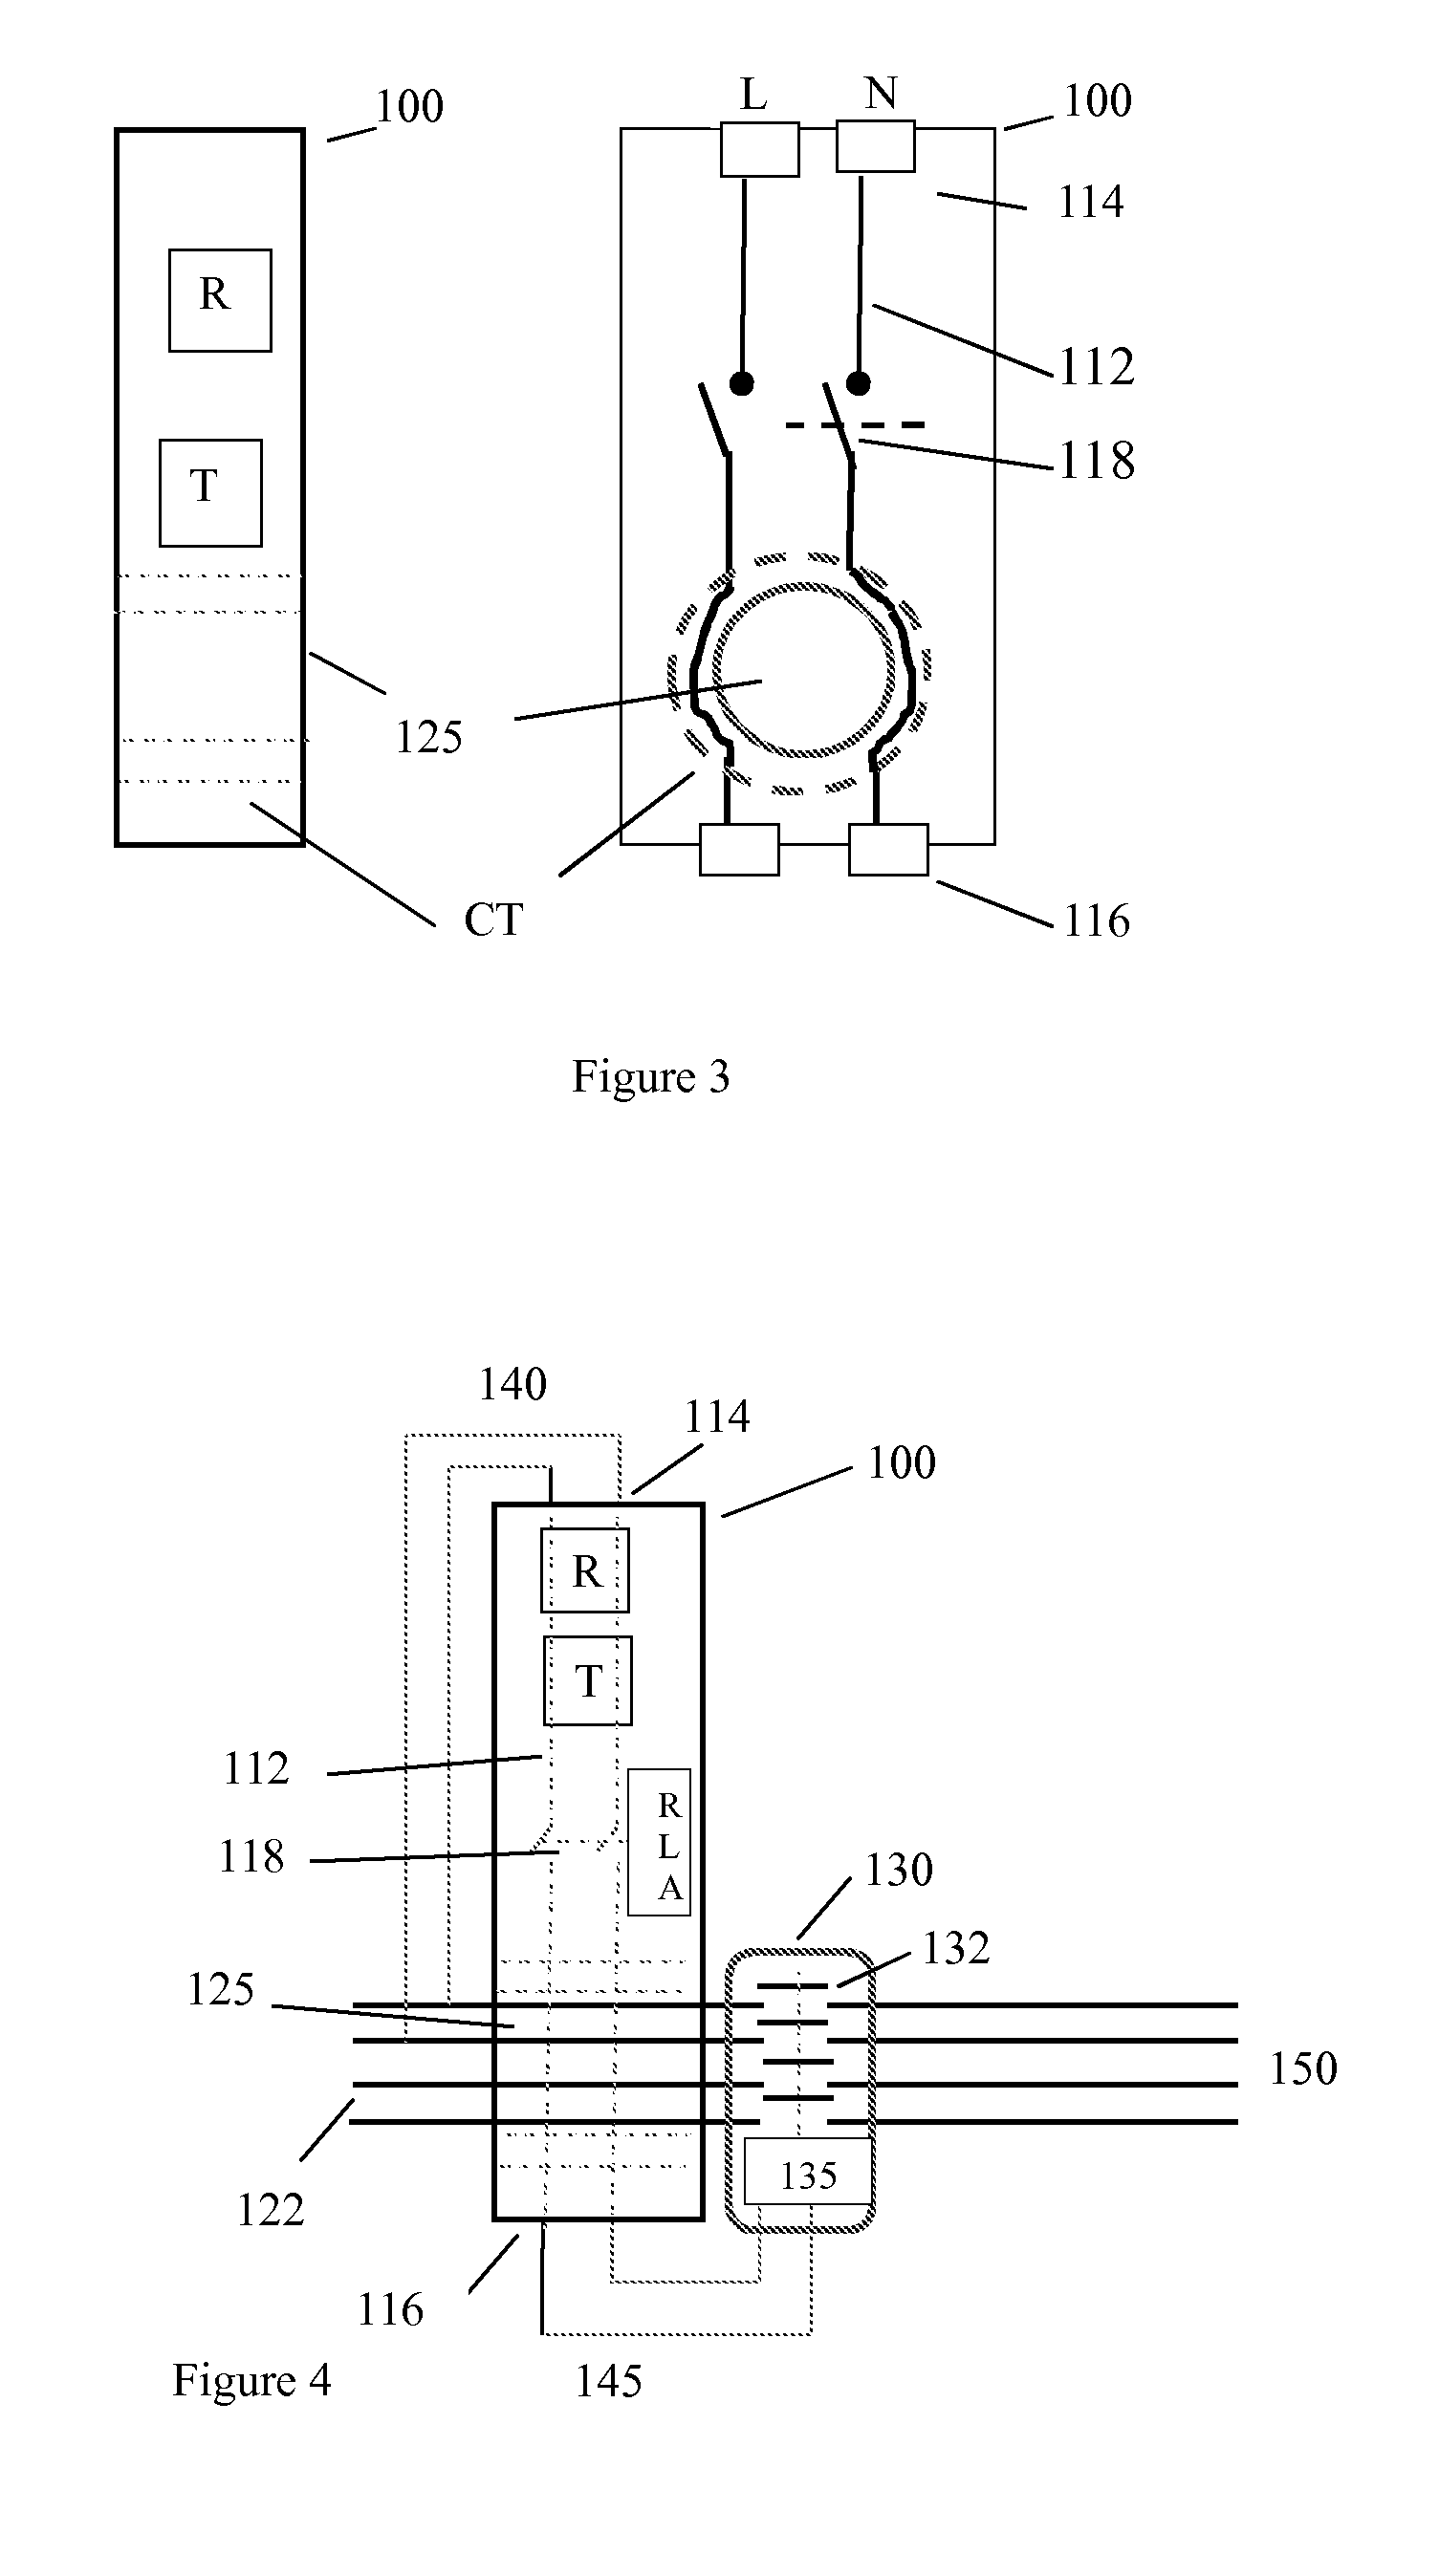 Electrical fault protection device